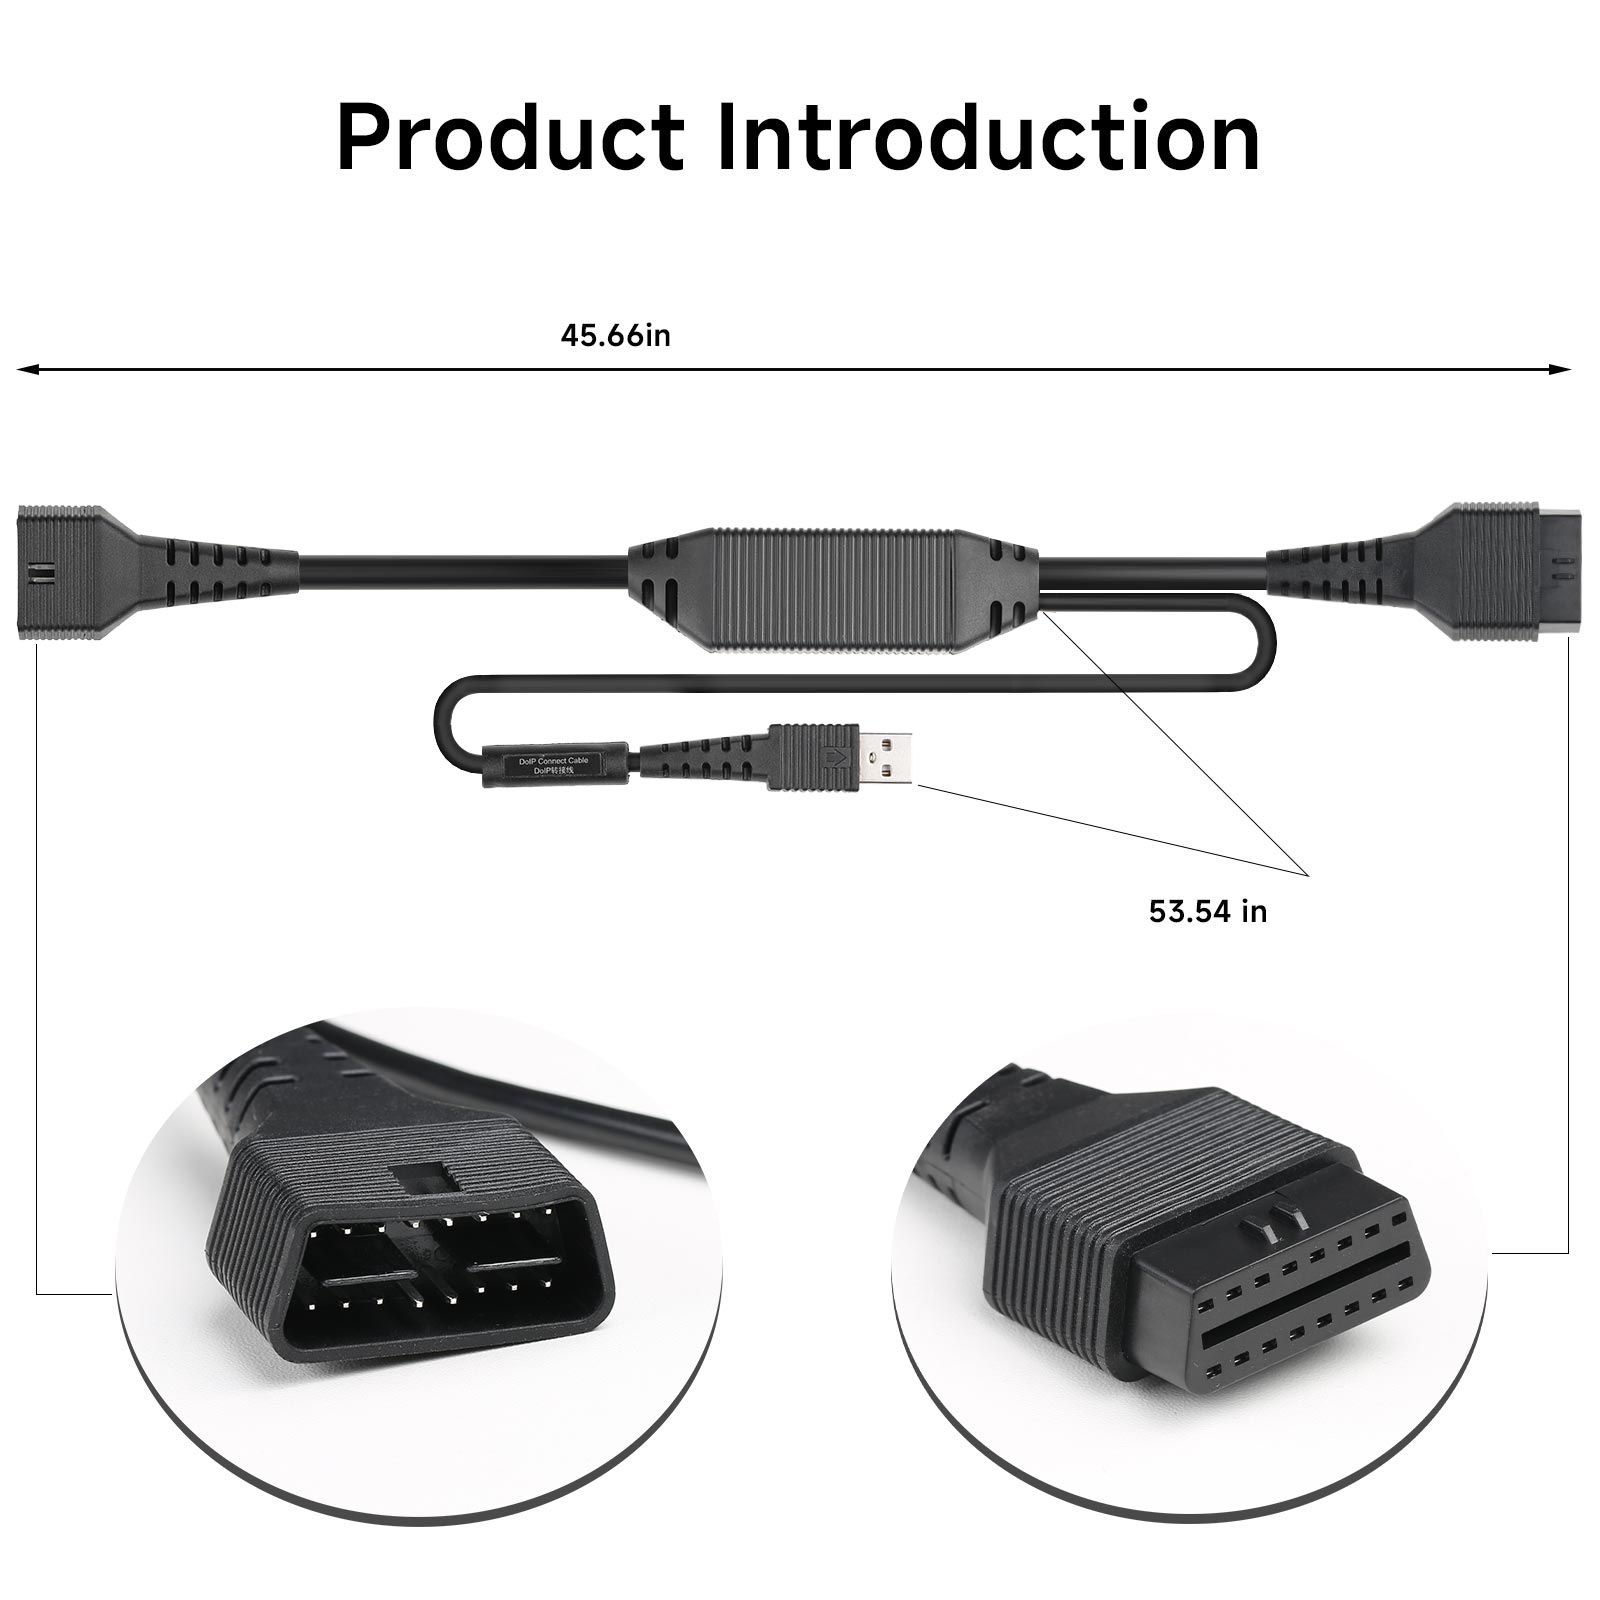 2024 LAUNCH DOIP Adapter Cable for Devices with CAR VII Bluetooth Connectors